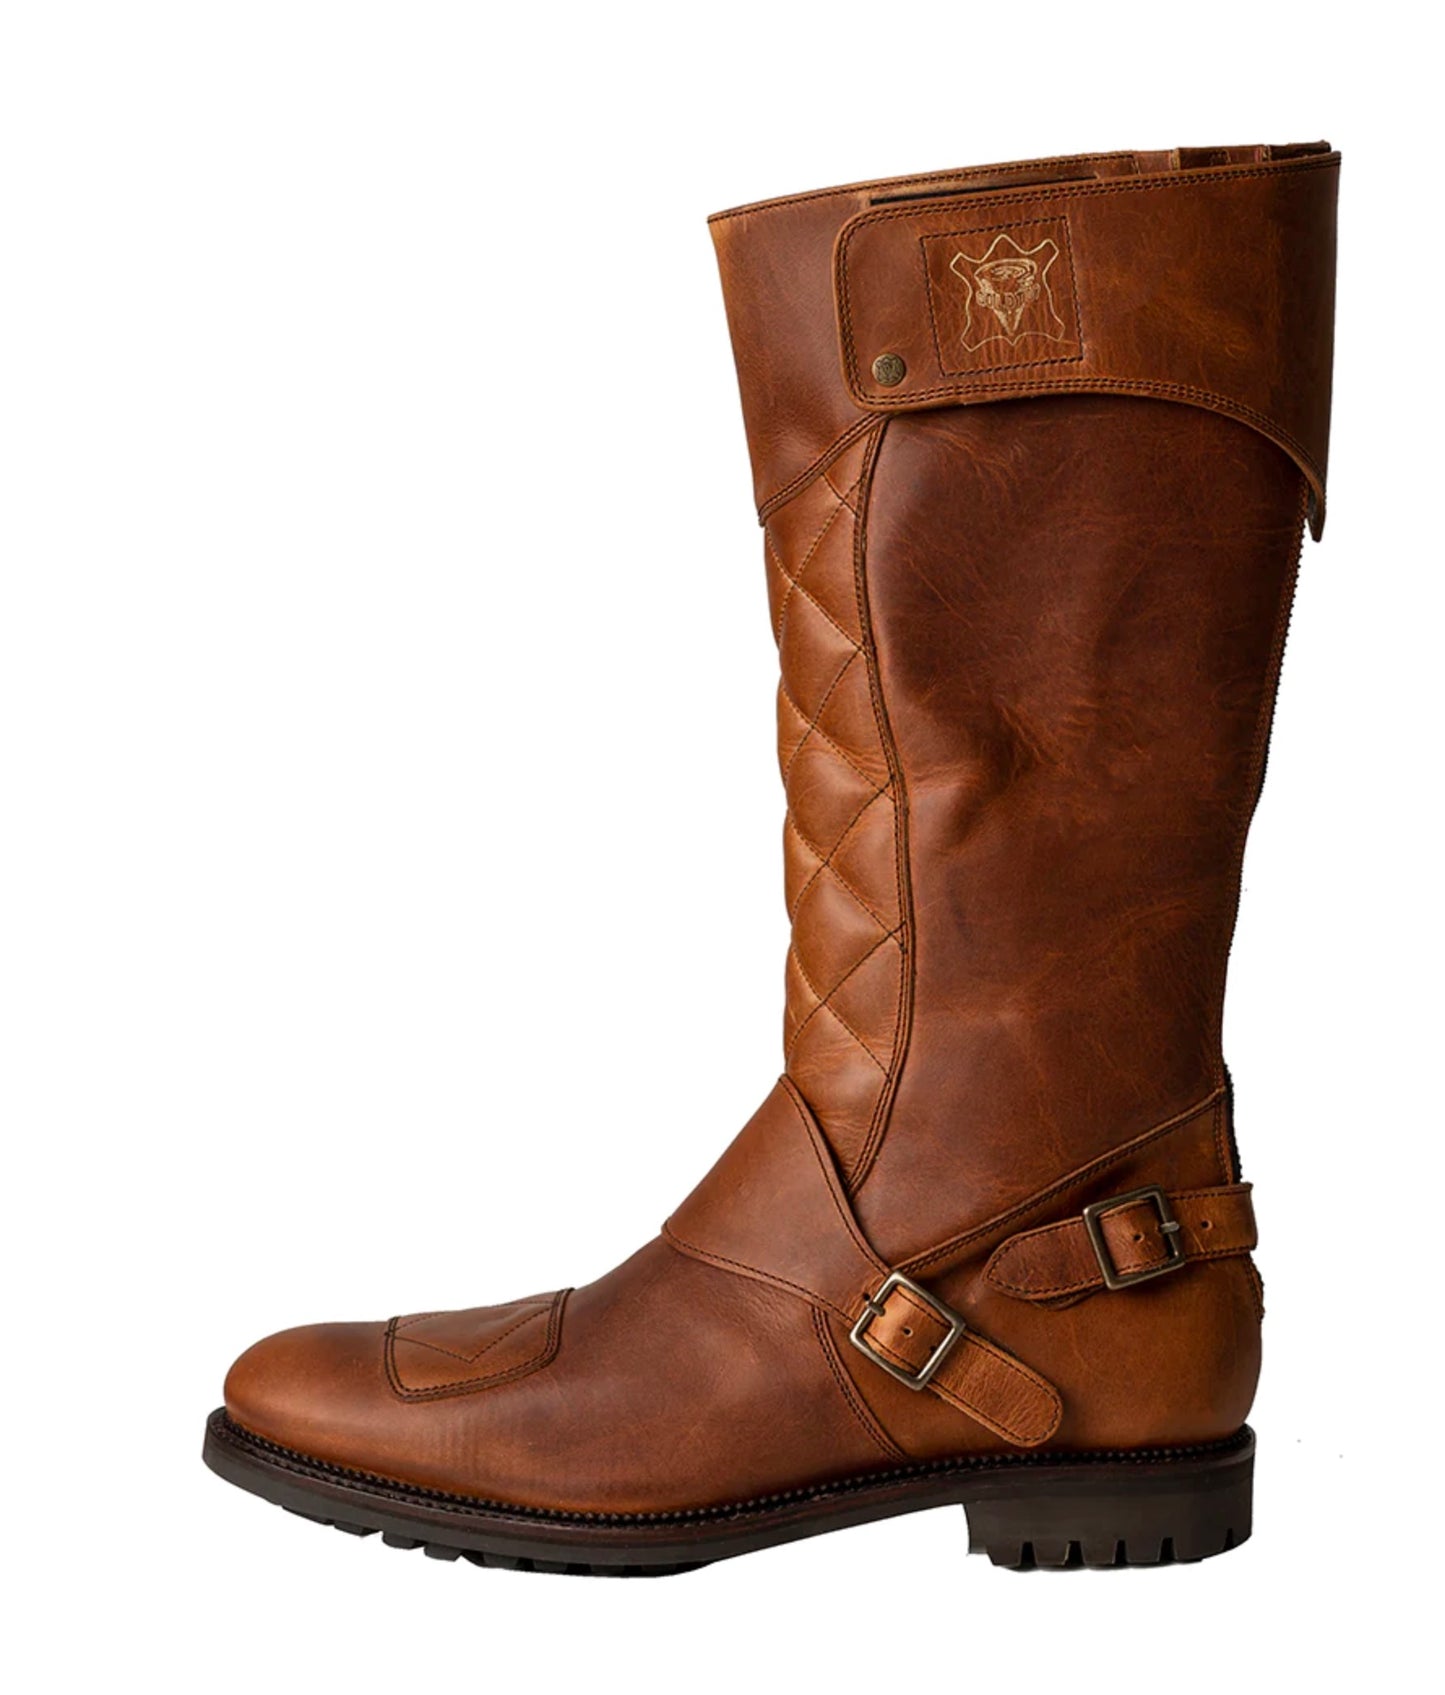 Trophy Boots : Waxed Brown